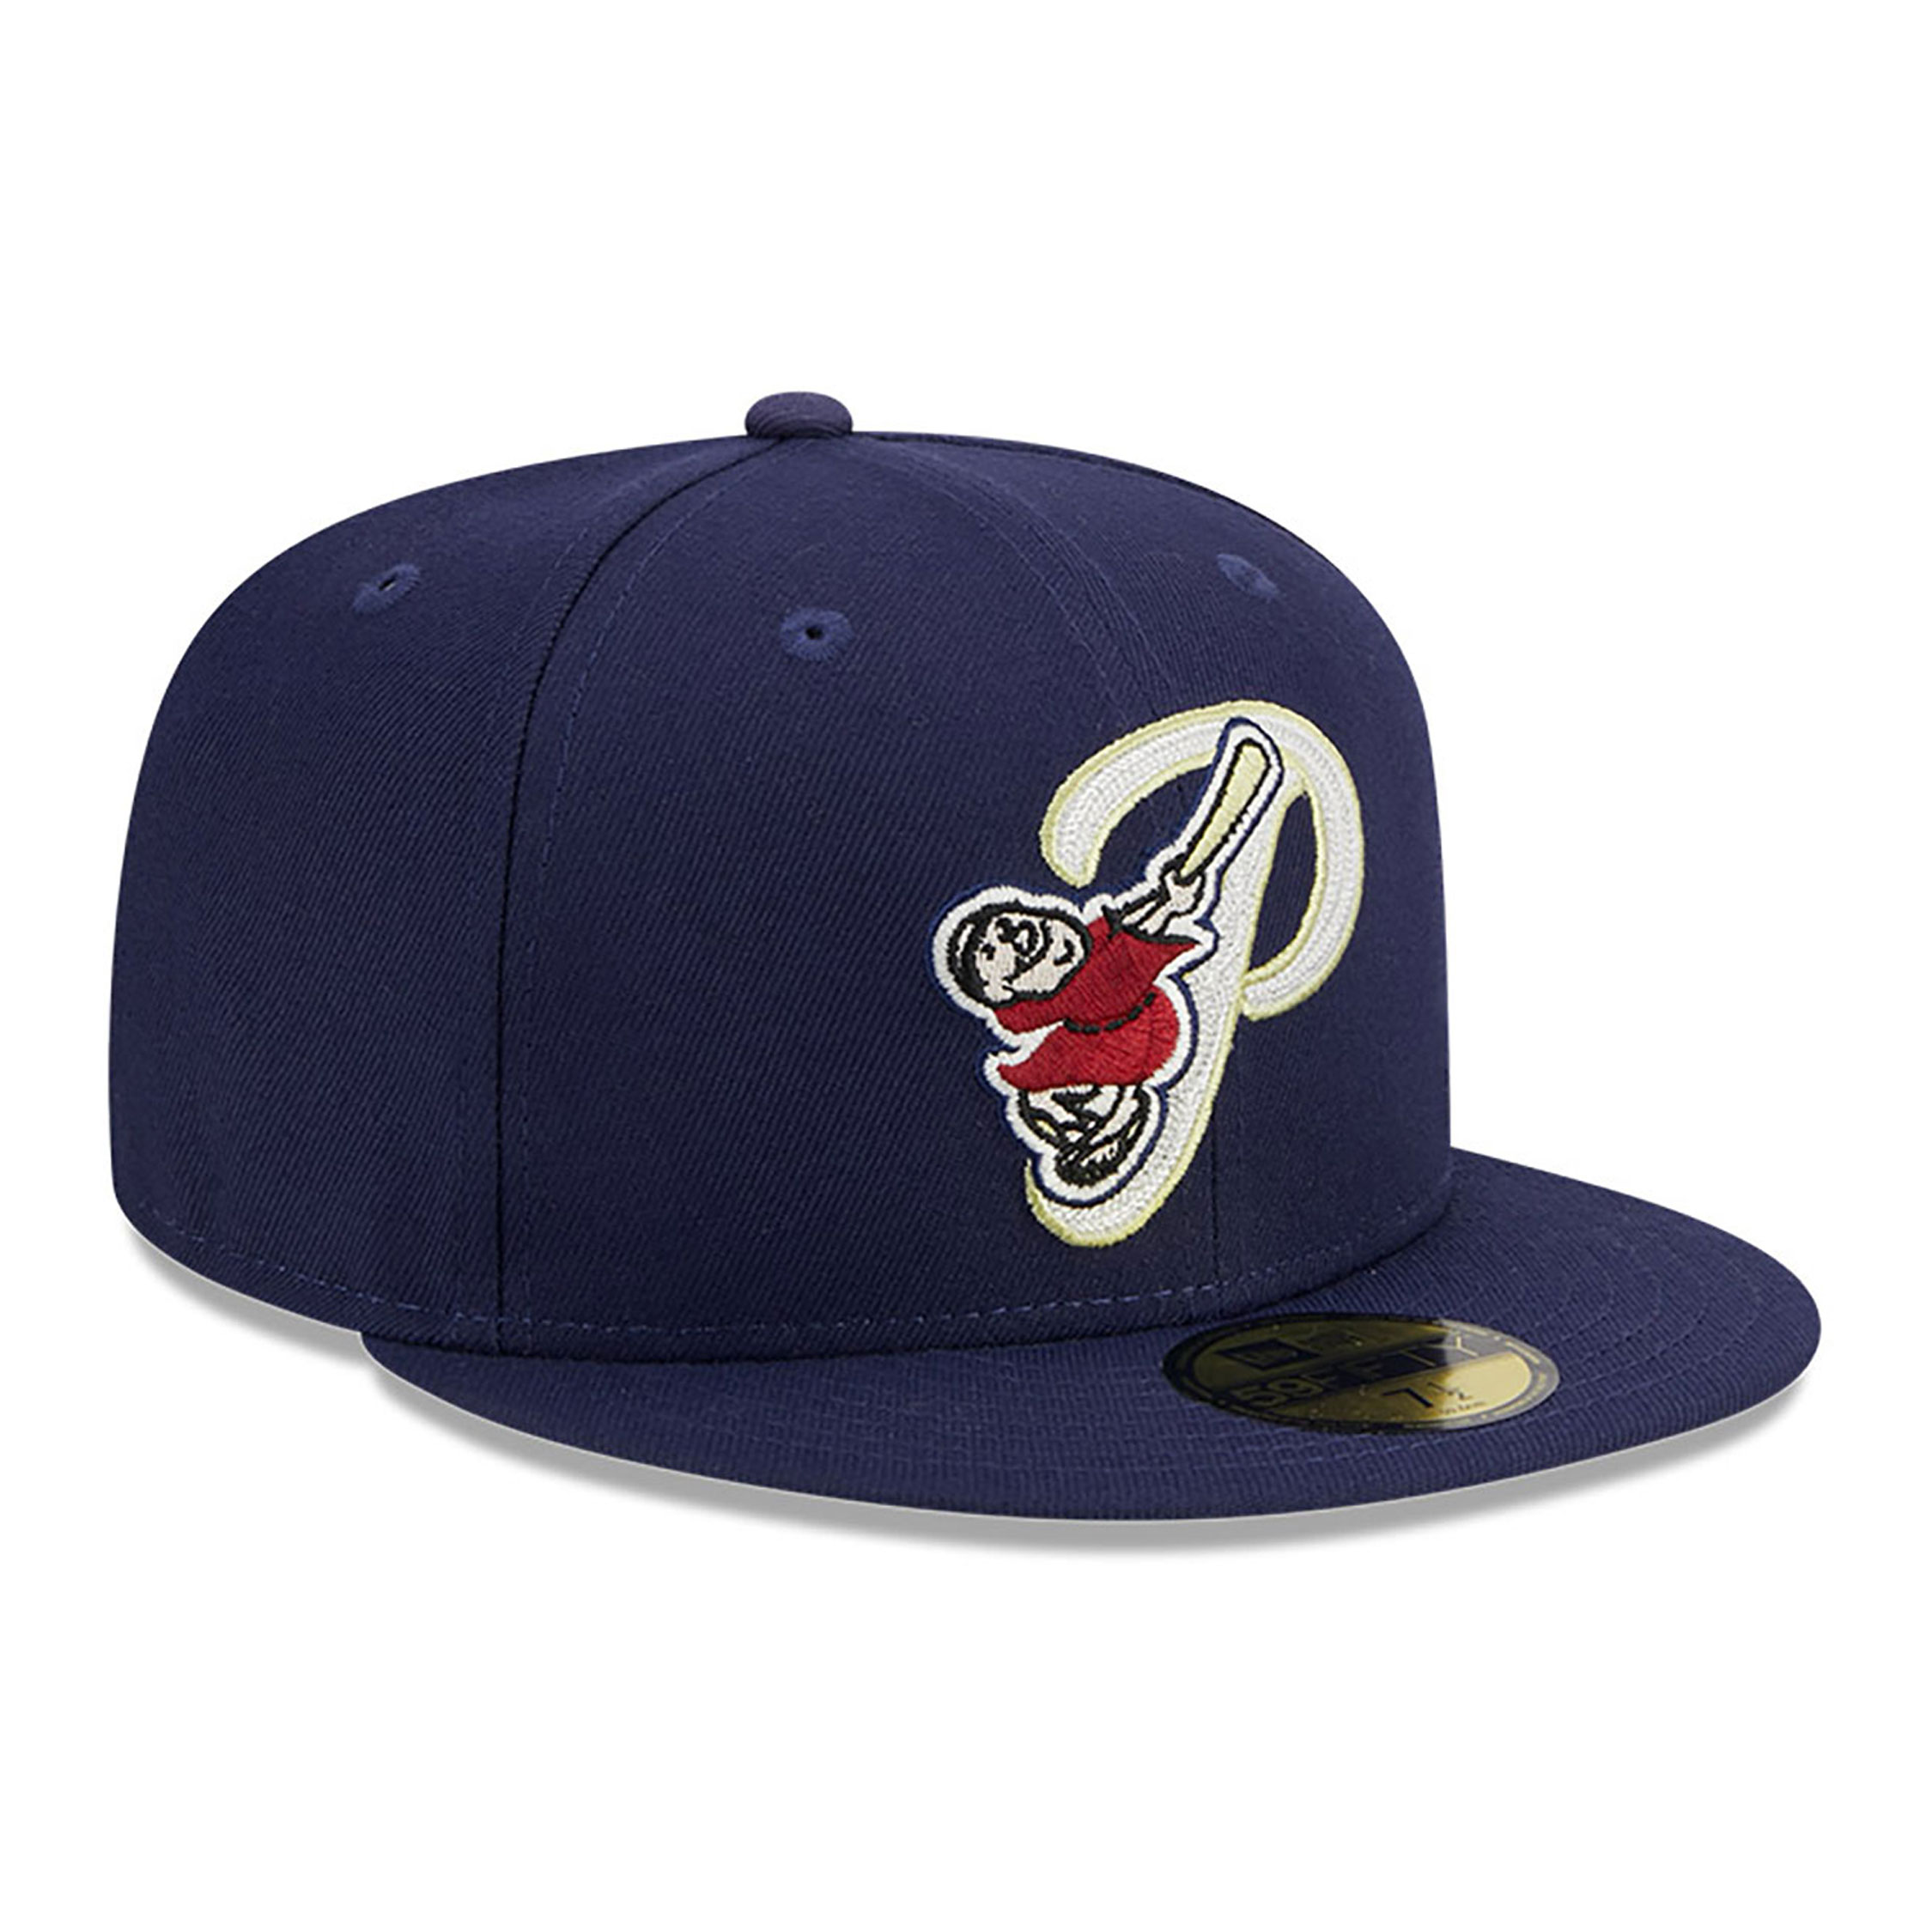 Duo Logo San Diego Padres 59FIFTY Fitted Cap D02_723 | New Era Cap UK